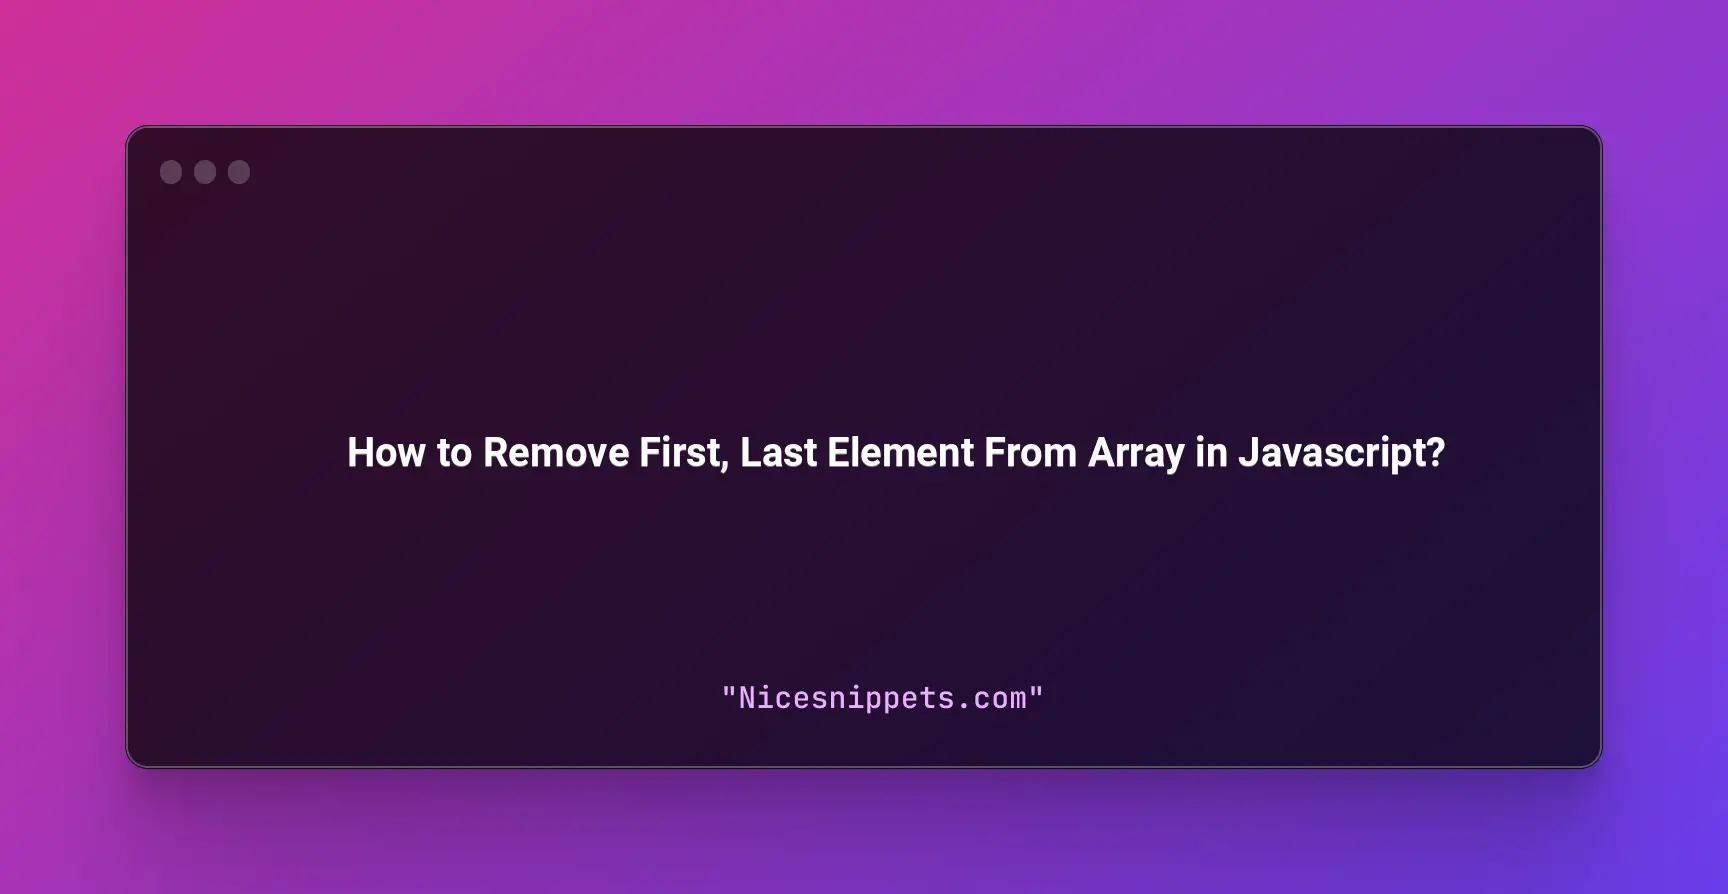 How to Remove First, Last Element From Array in Javascript?